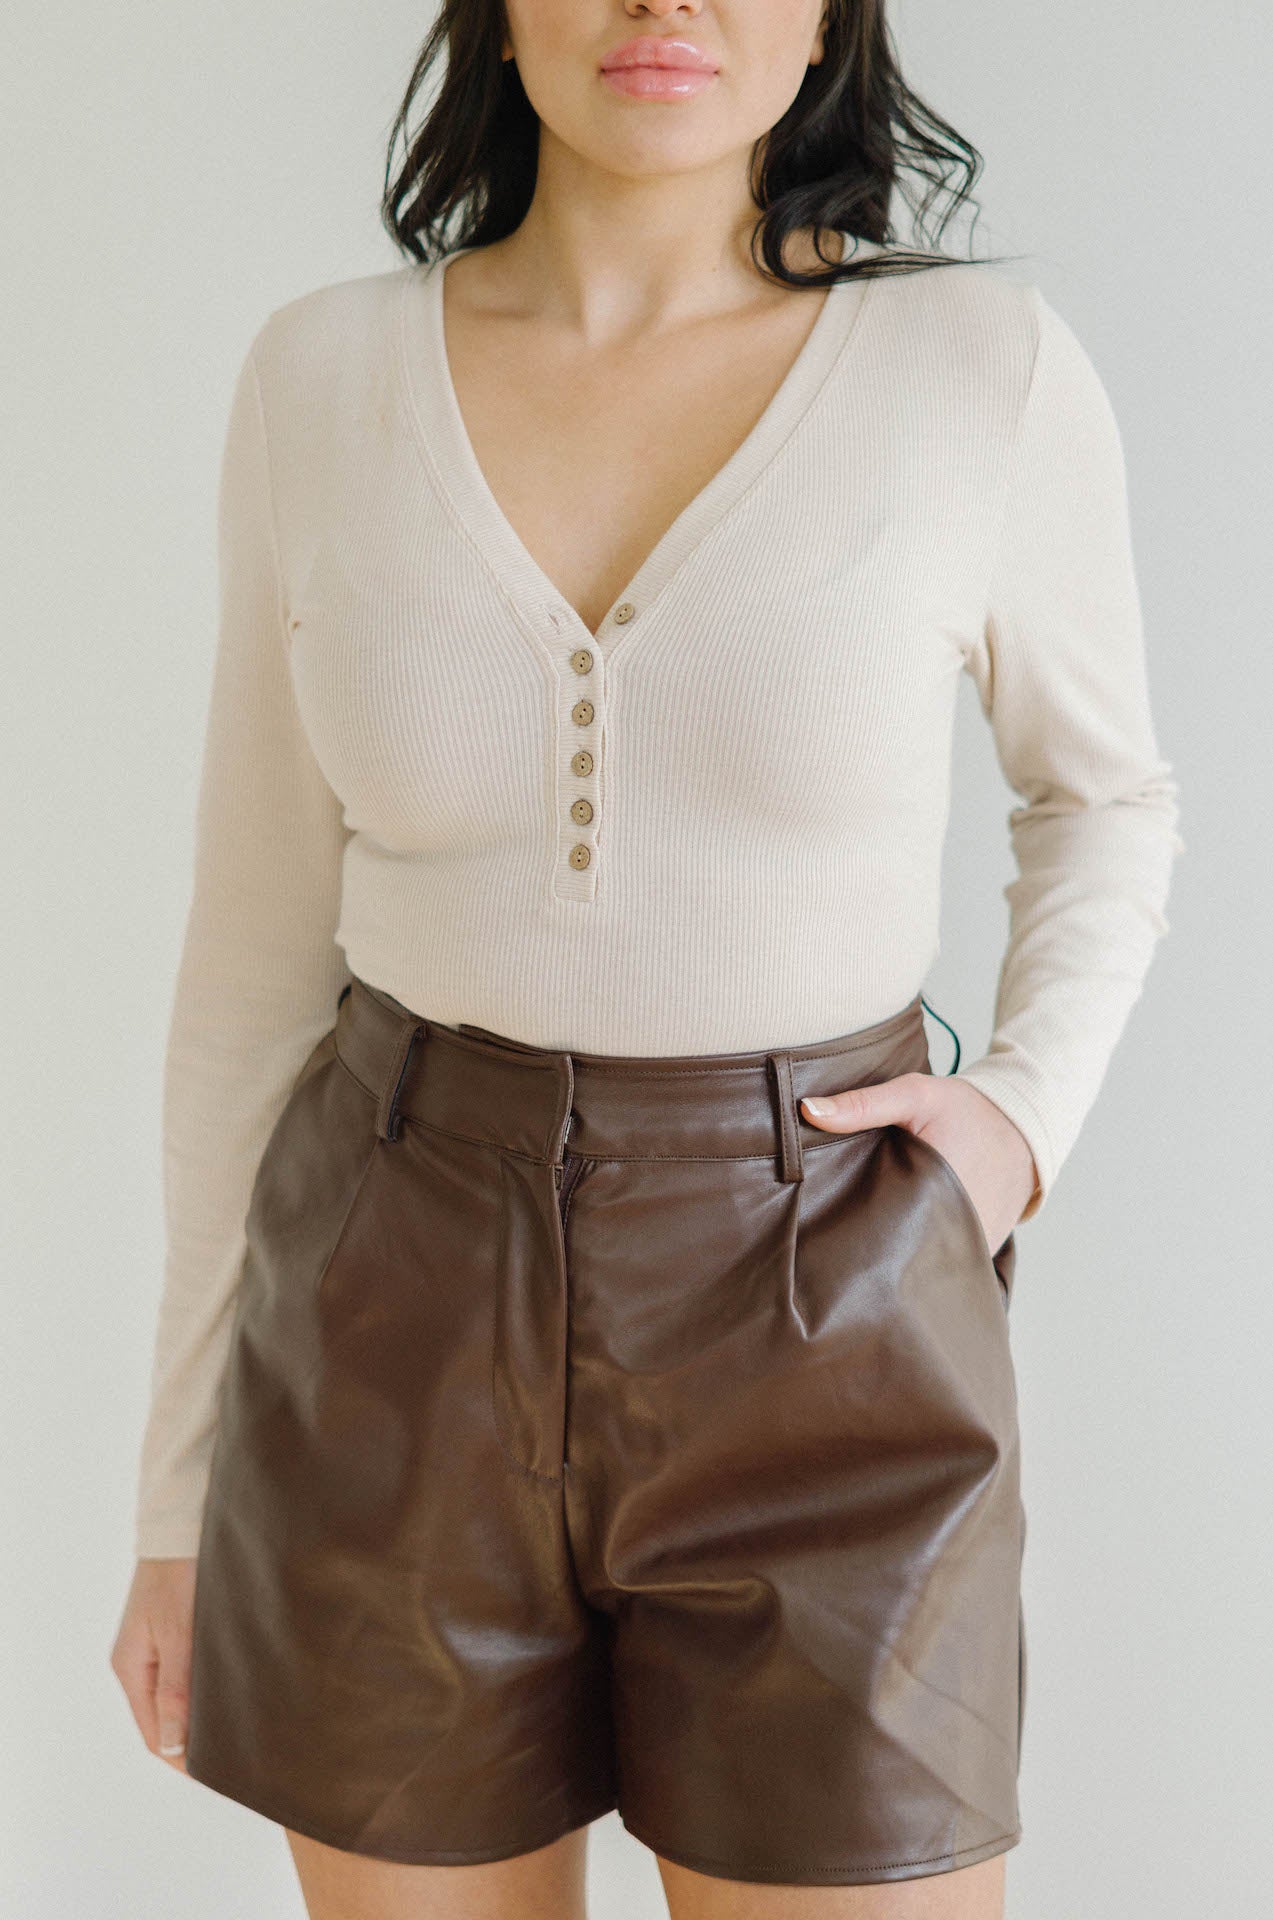 Romie Brown Vegan Leather High Waisted Shorts